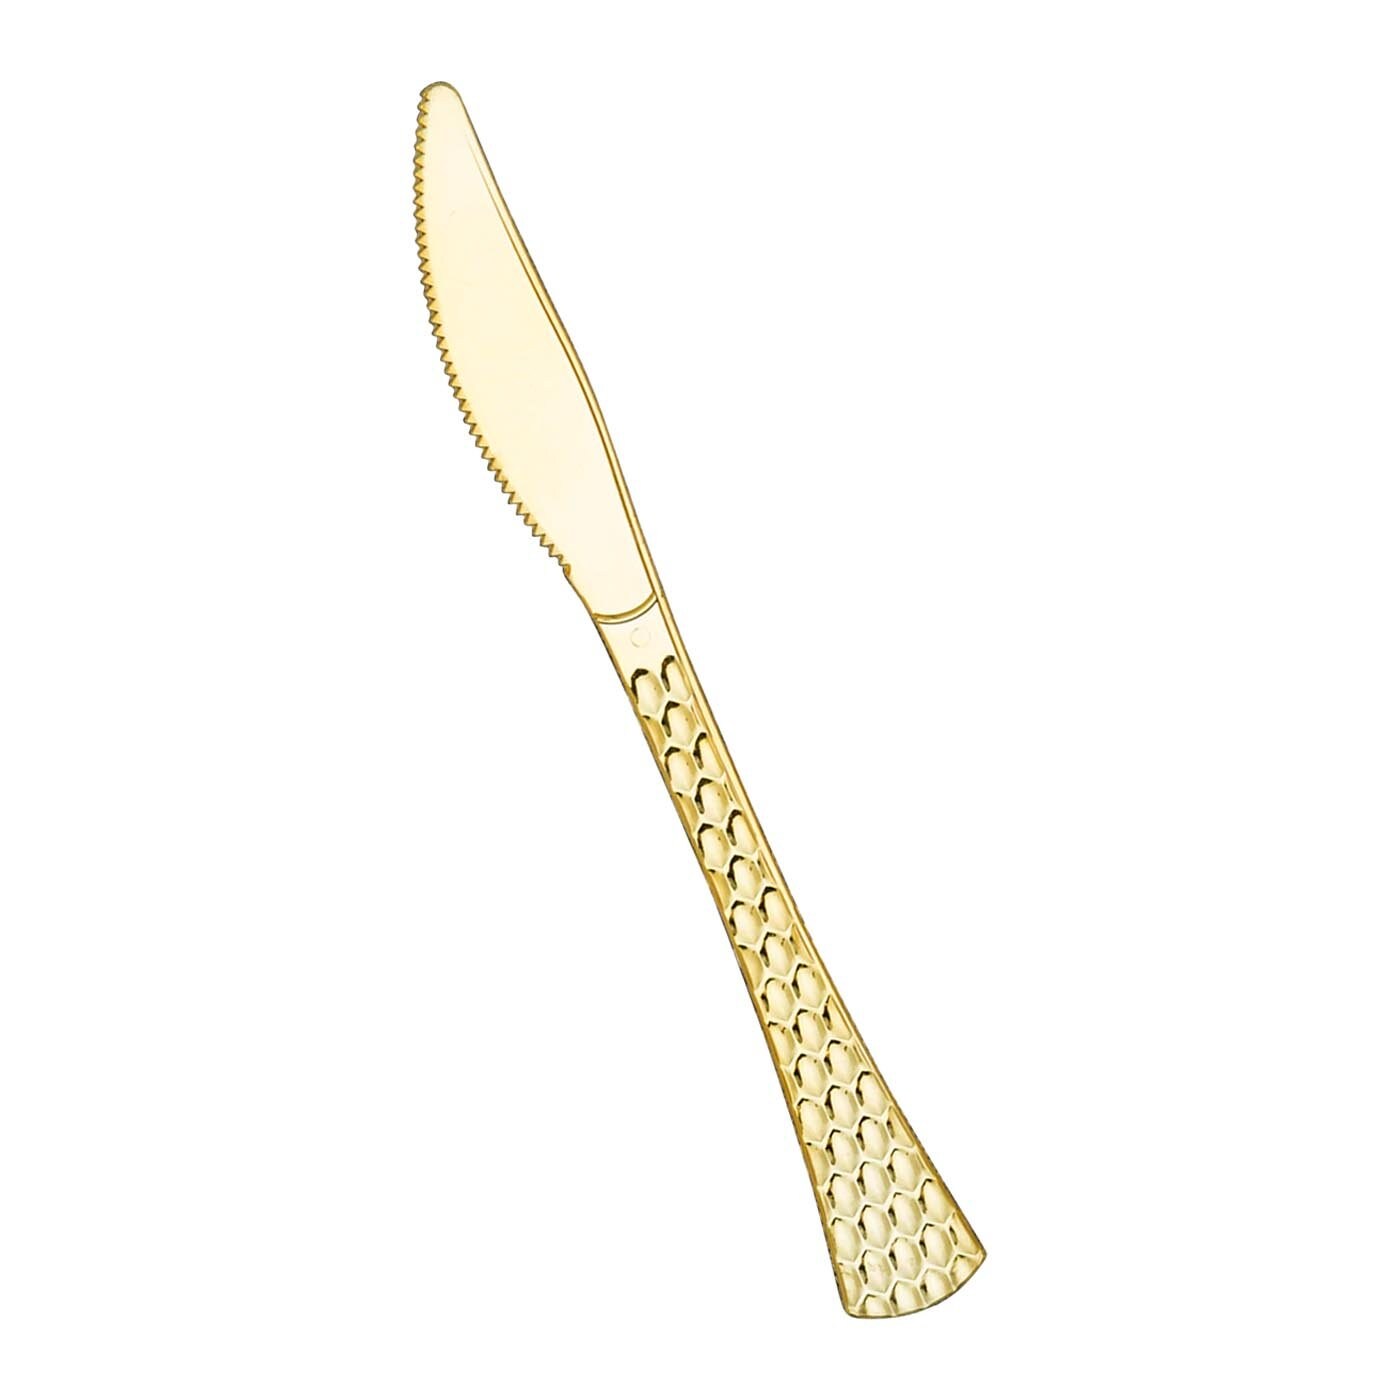 Shiny Gold Glamour Cutlery Disposable Plastic Knives (600 Knives)